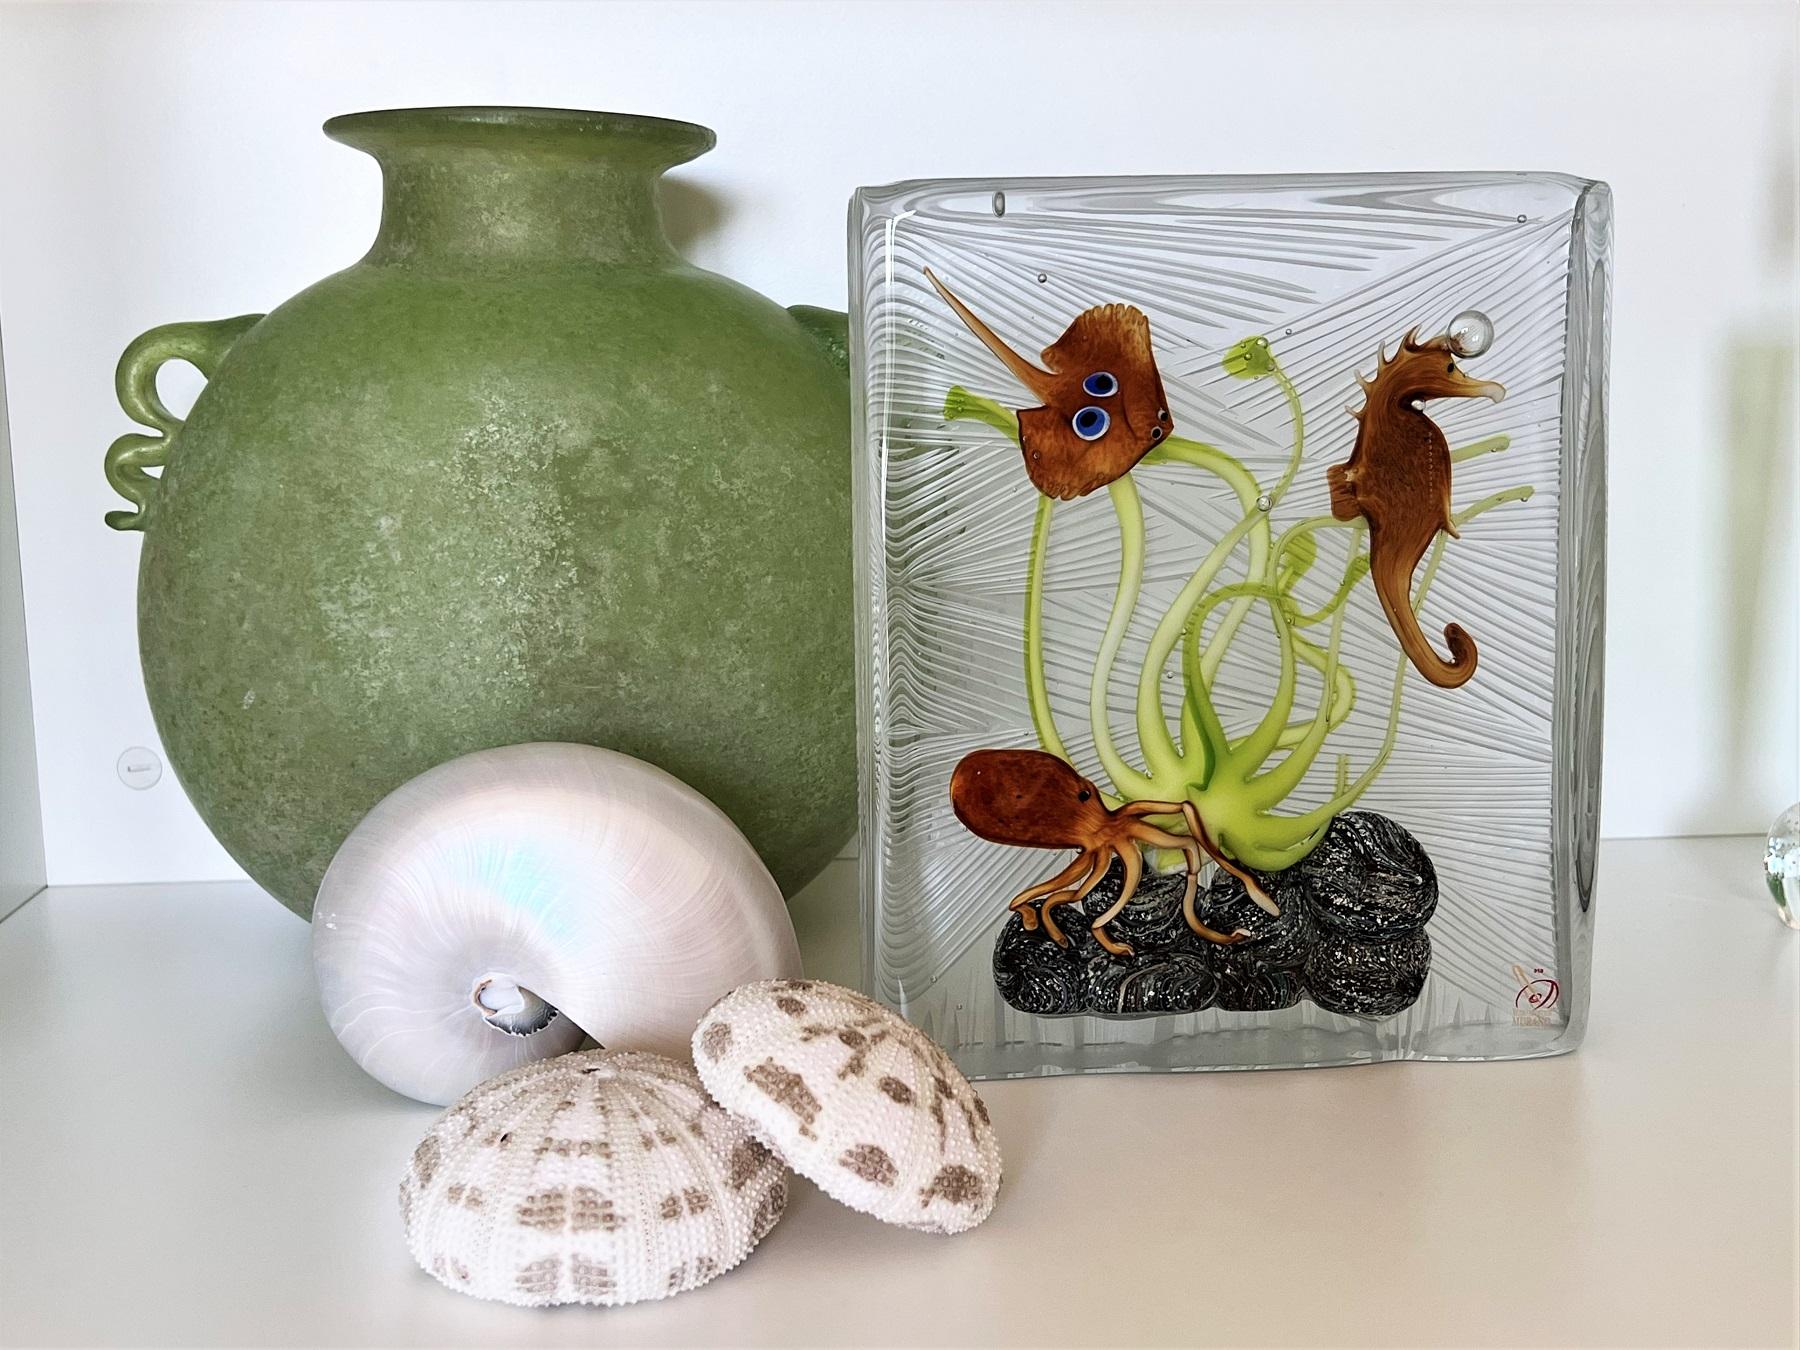 Very large Beautiful Murano aquarium made of glass showing sea animals and sea grass on rock.
The aquarium is handmade in many different steps and signed by the master Eugenio Ferro, Glassmaster of Murano.
The aquarium comes with the certificate of